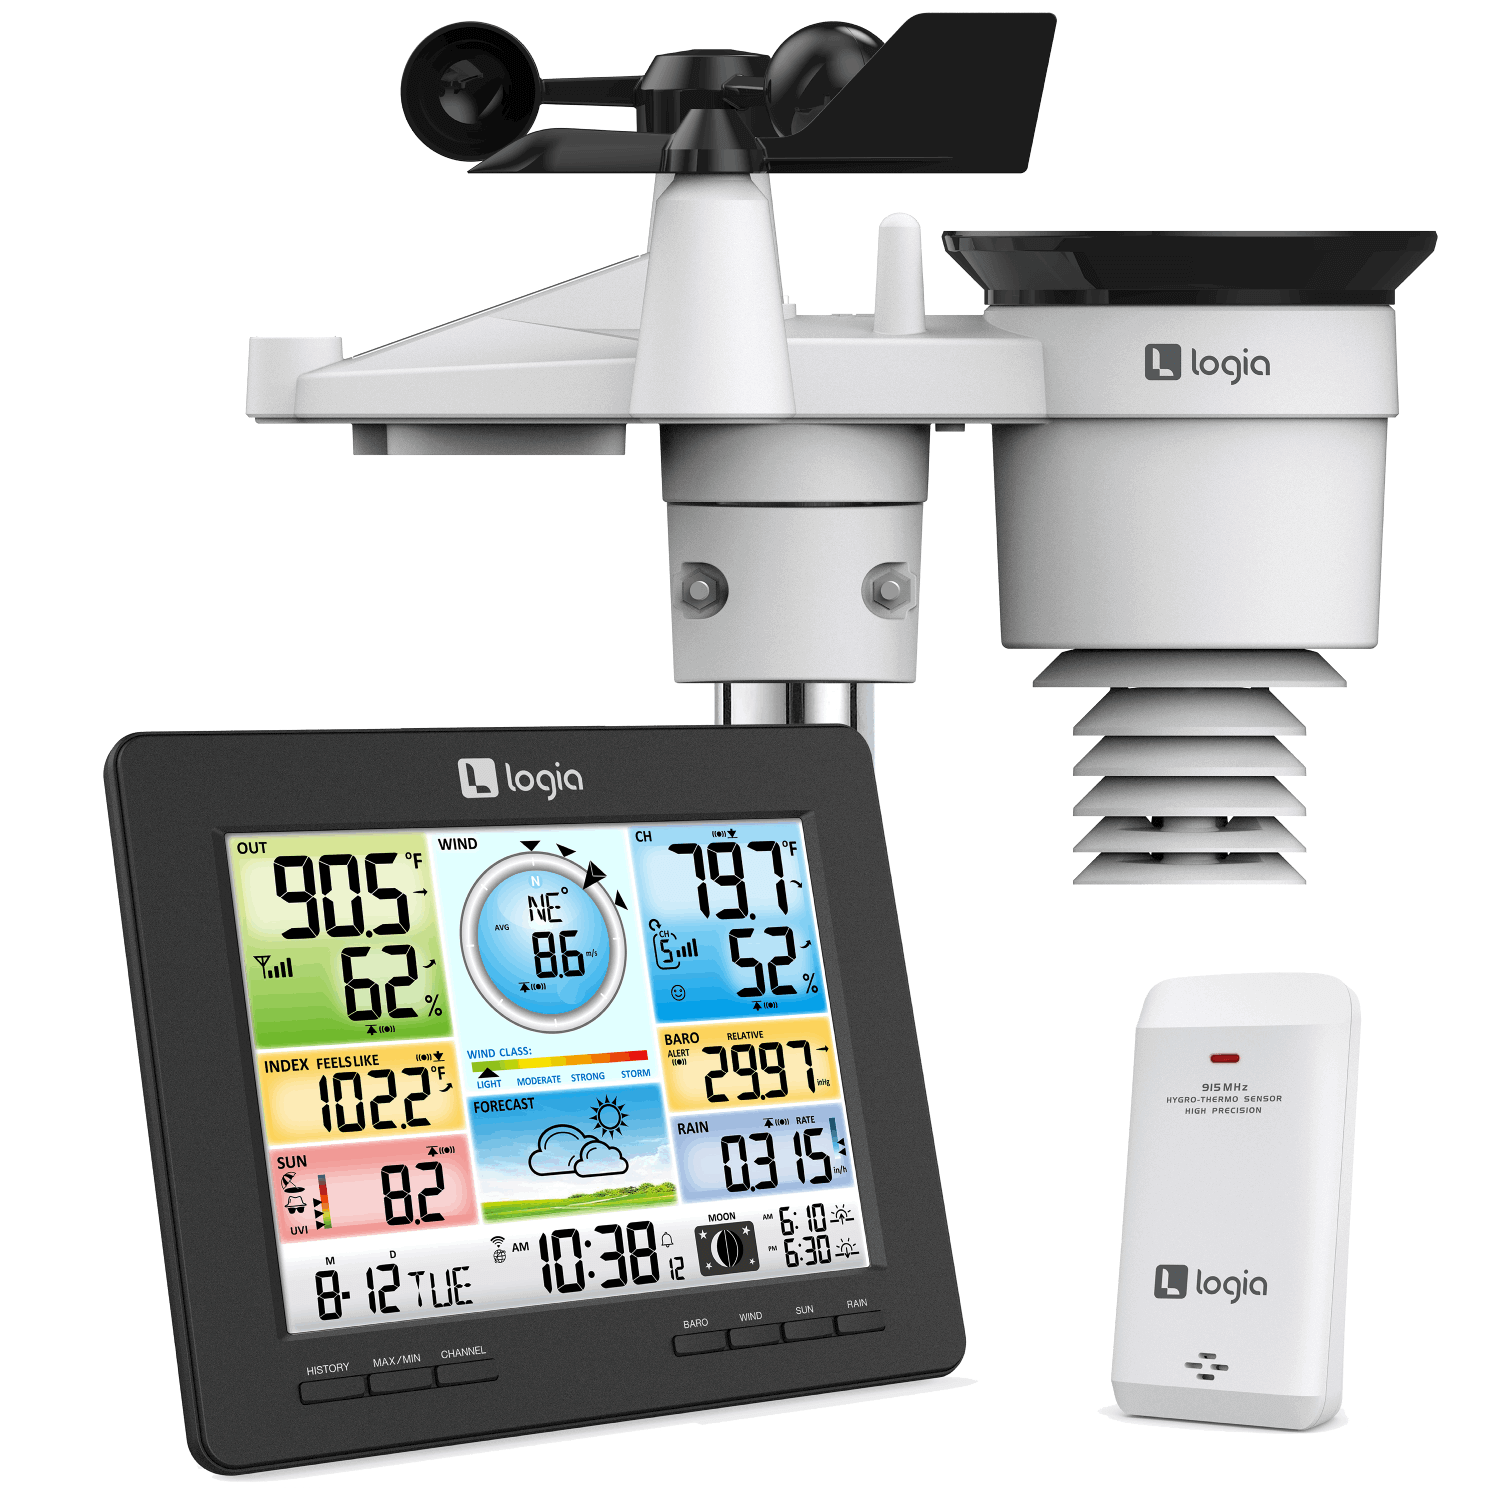 Ambient Weather 3'' Wireless Outdoor Weather Station